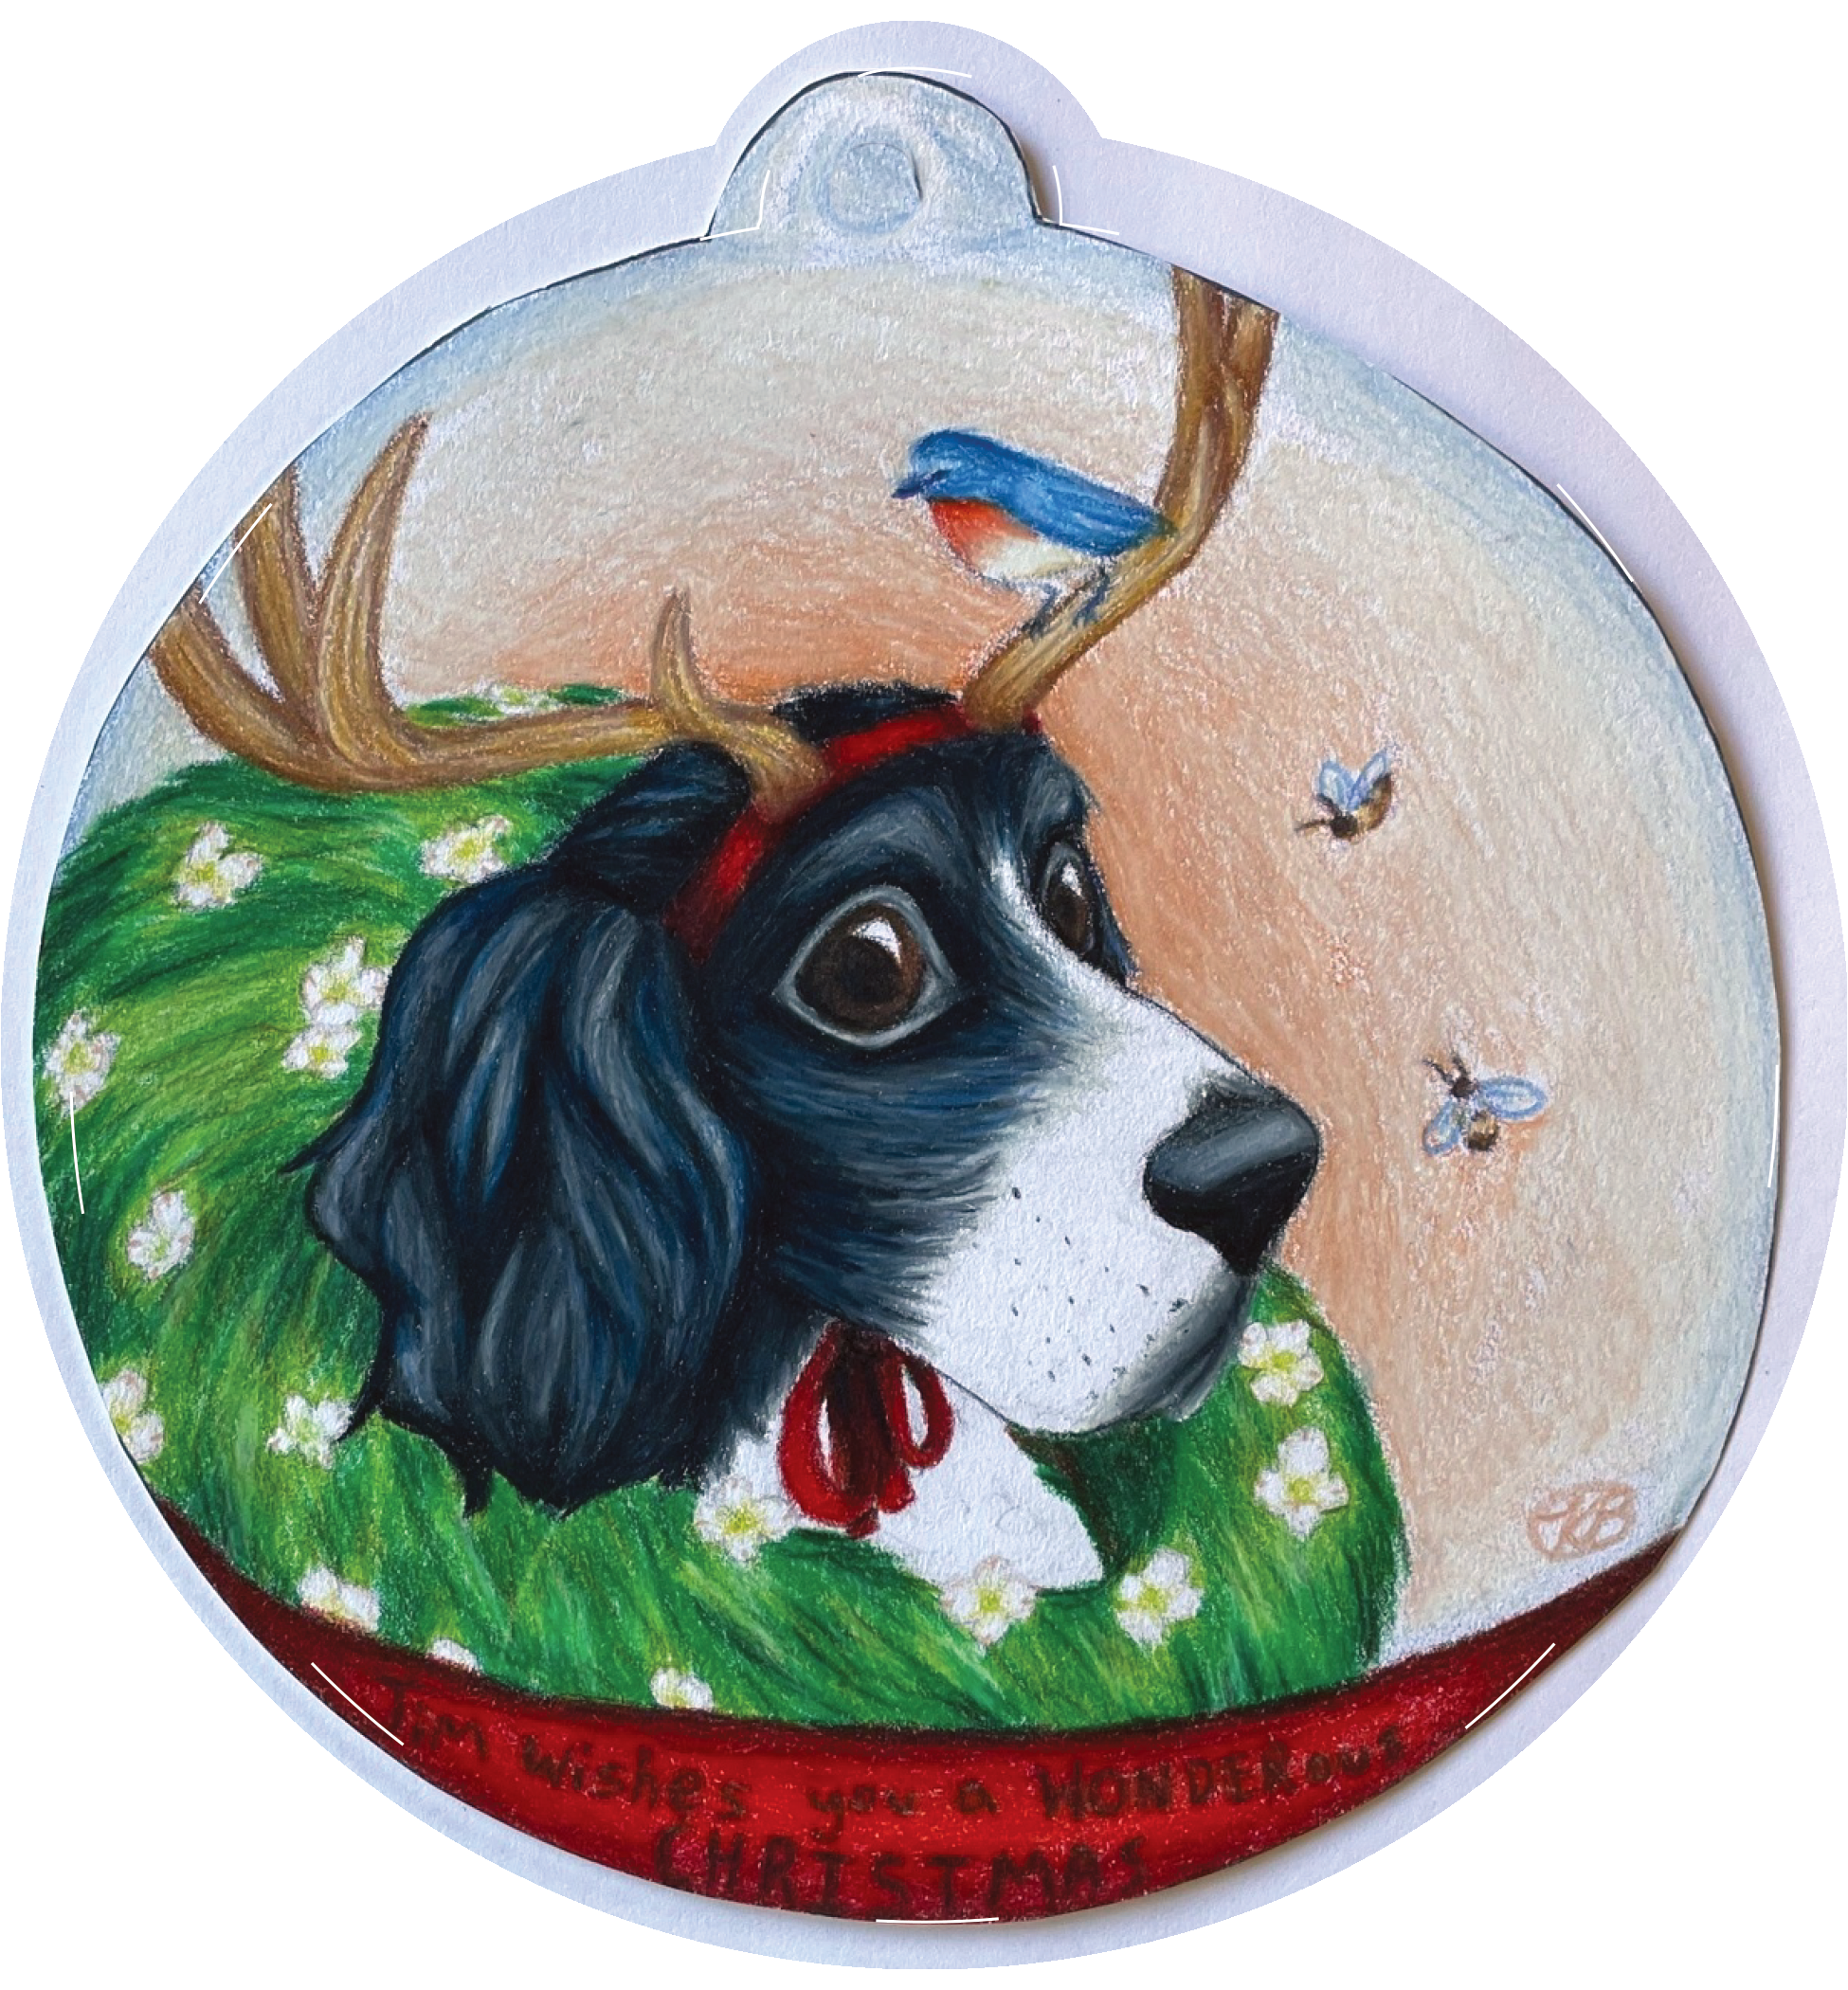 Ornament depicting a dog wearing antlers and a wreath around its neck